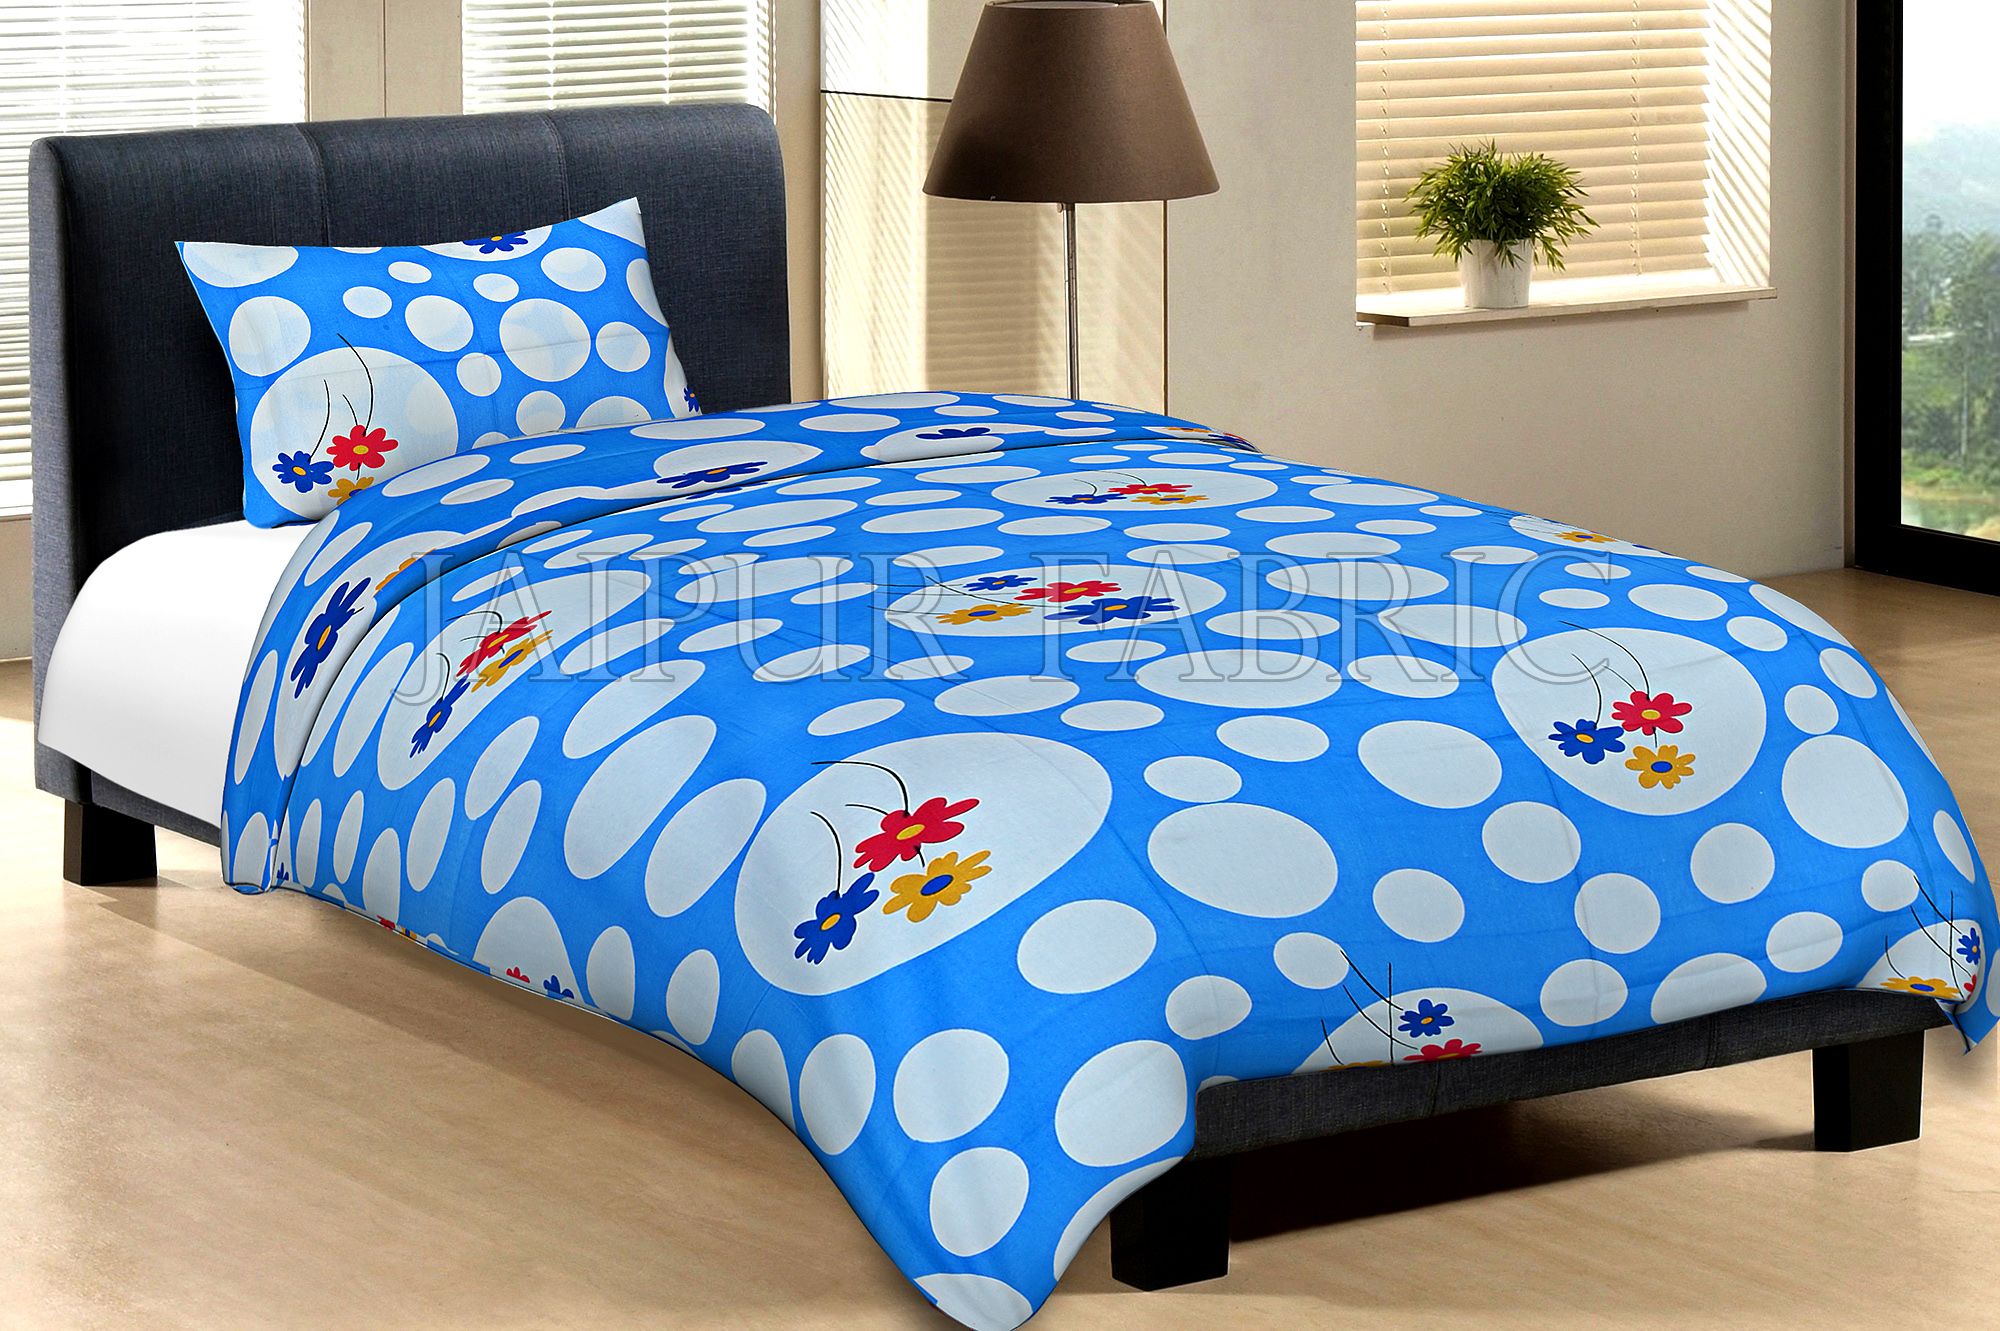 Blue Base With Large Amd Small Polka Dot And Flower Print Cotton Single Bed Sheet with 1 pillow  cover